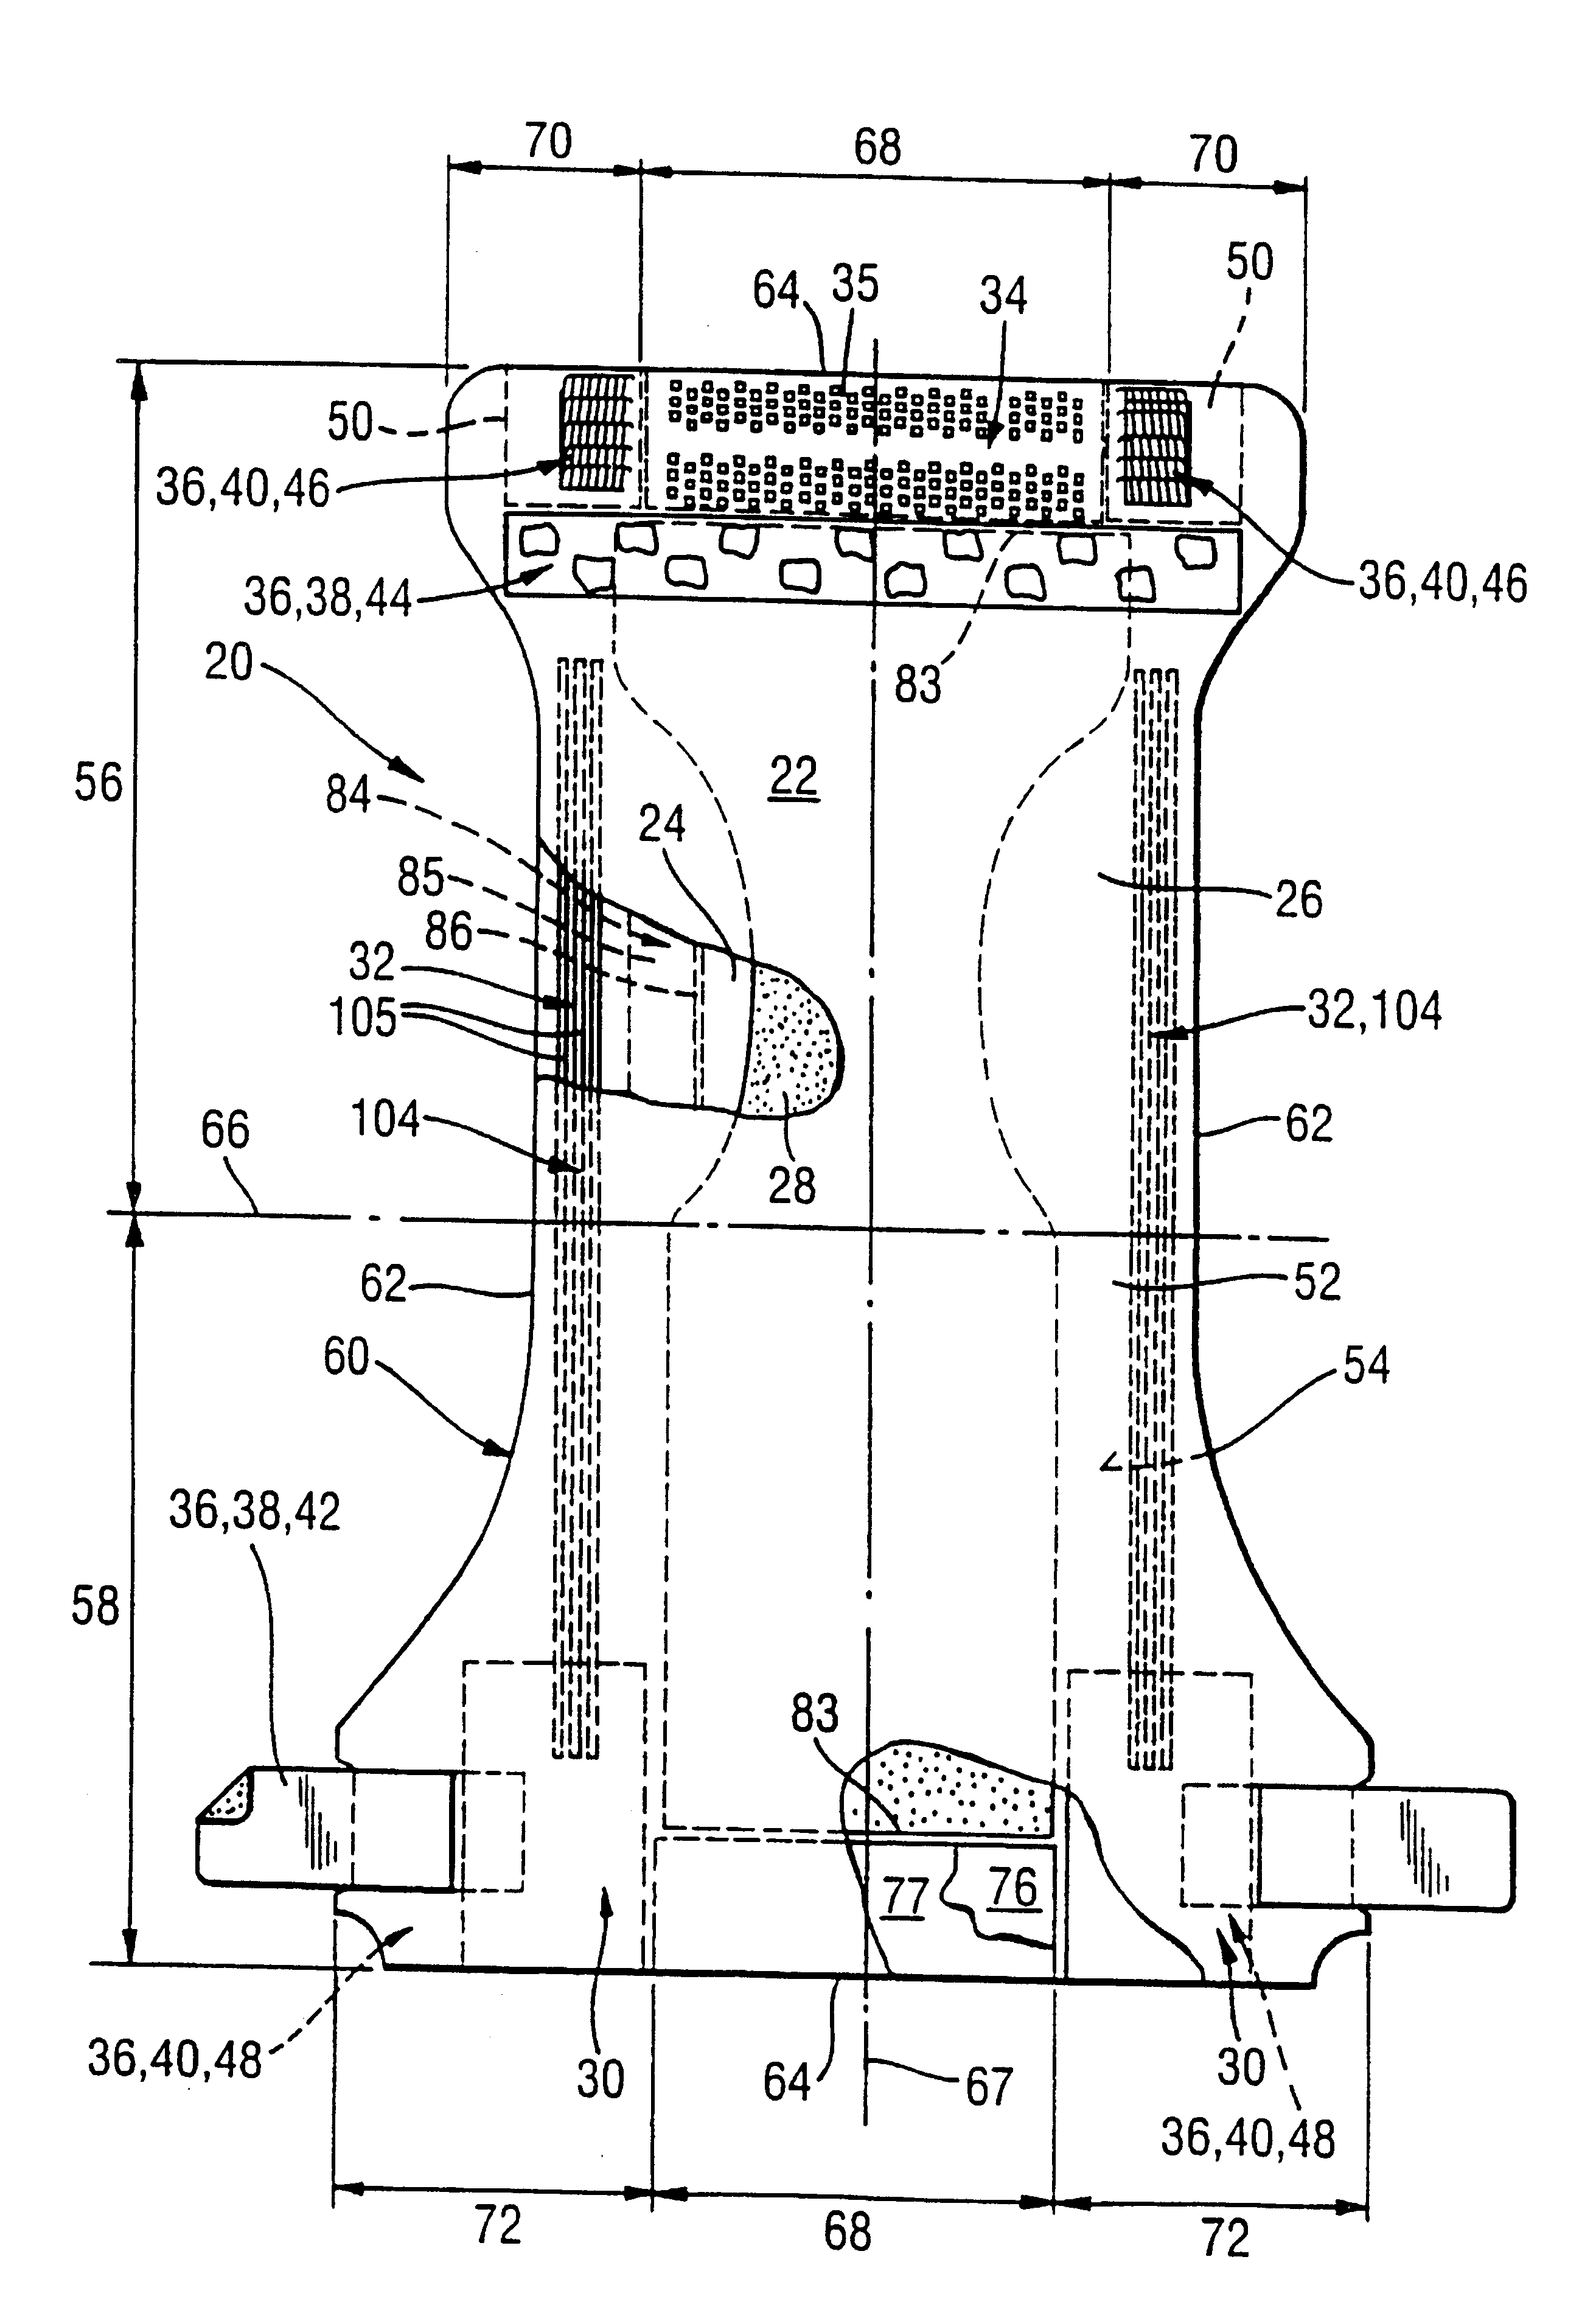 Absorbent articles with distribution materials positioned underneath storage material